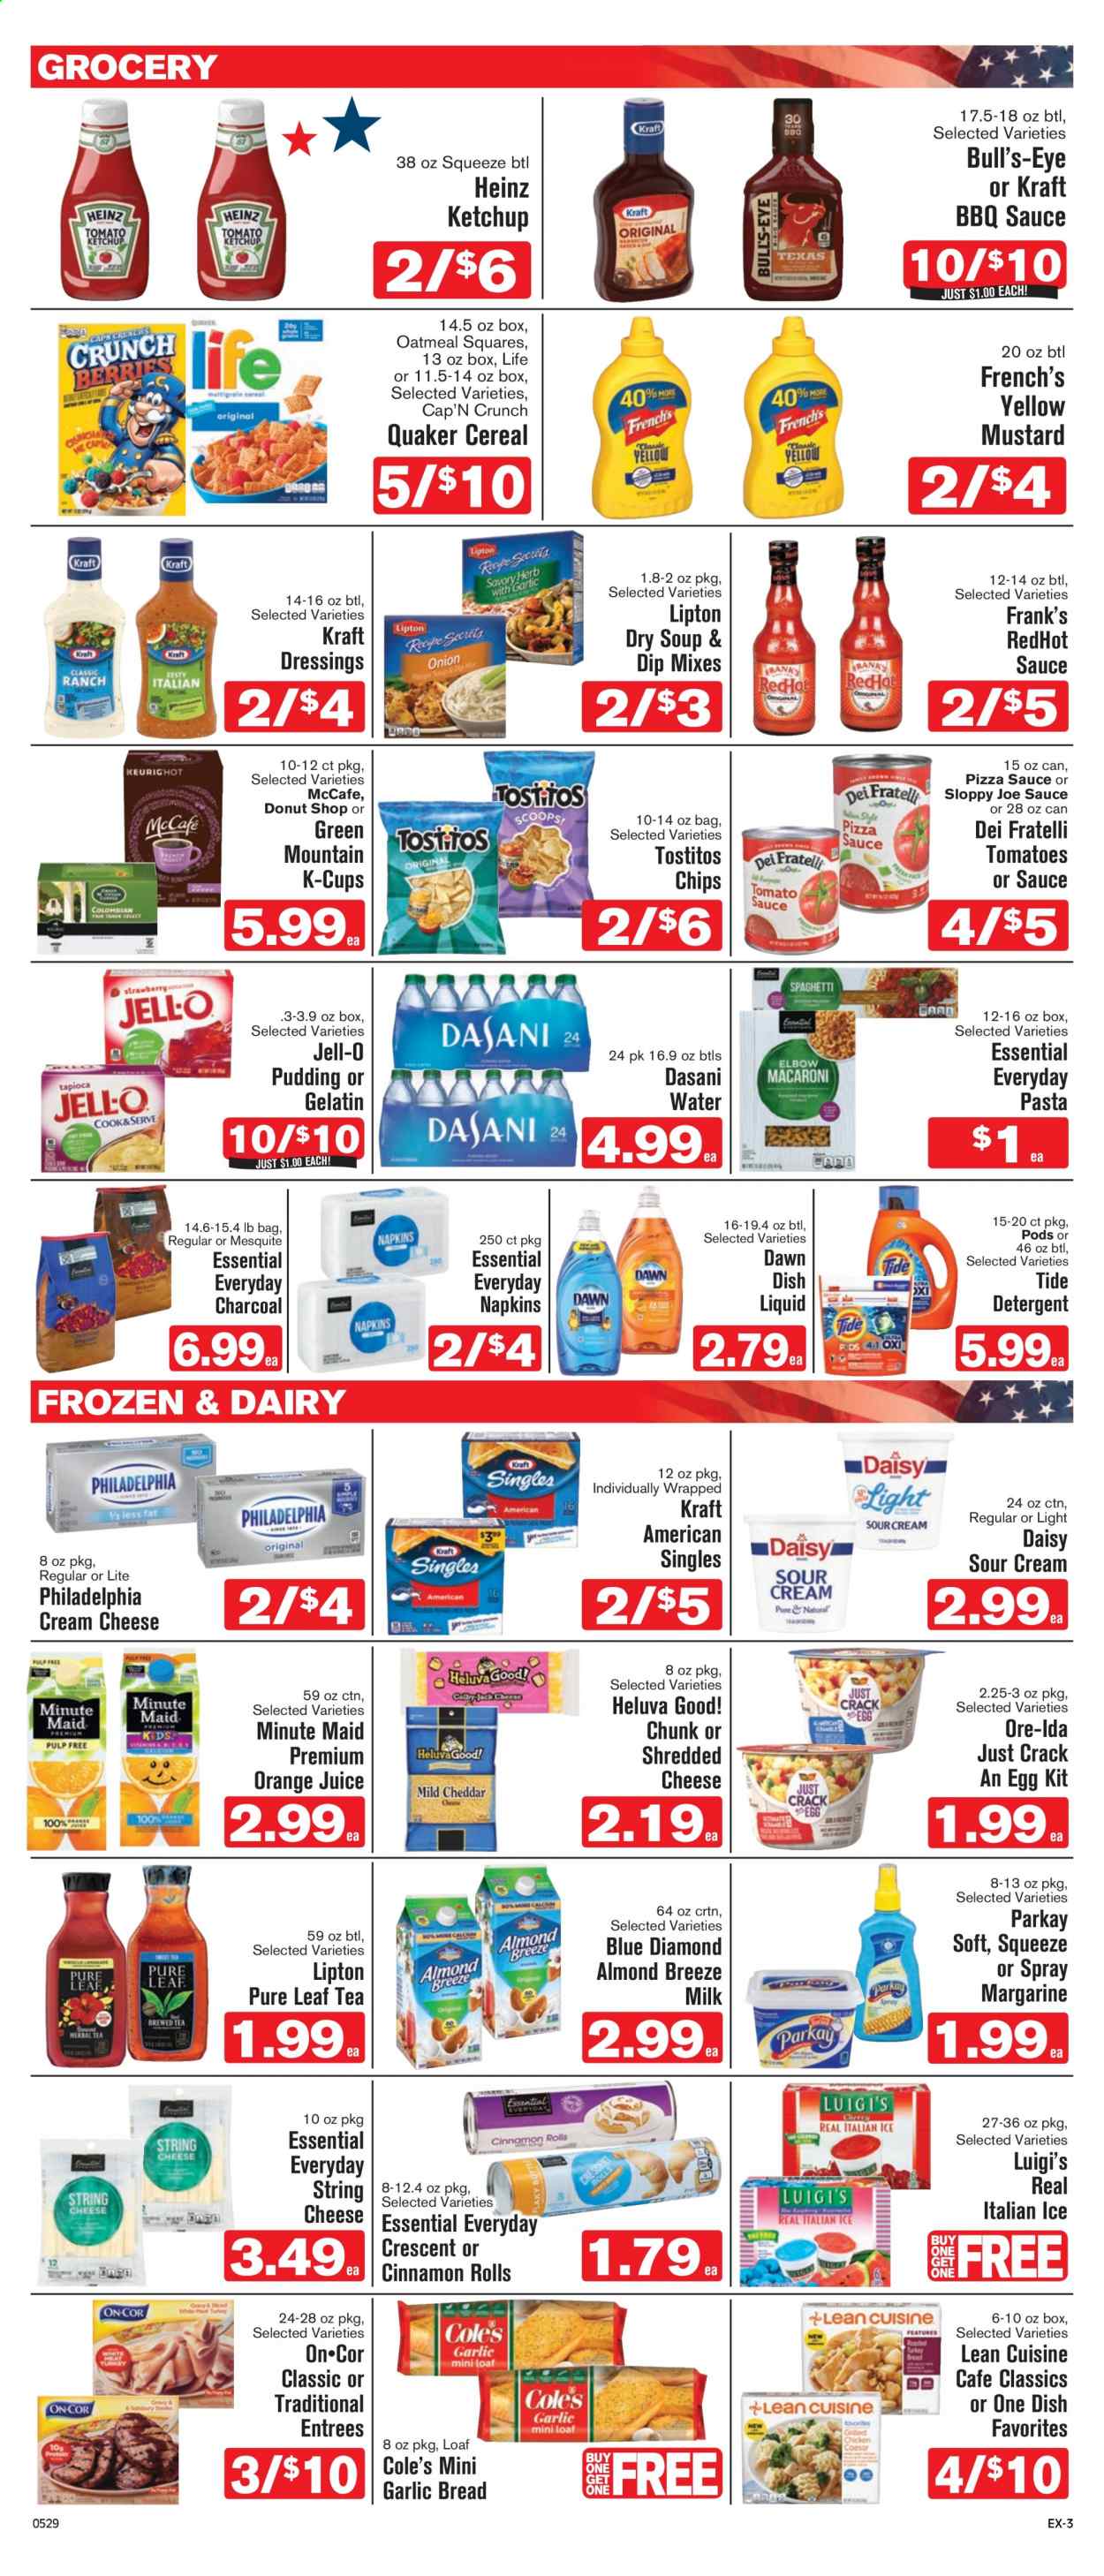 thumbnail - Shop ‘n Save Express Flyer - 05/29/2021 - 06/04/2021 - Sales products - bread, cinnamon roll, tomatoes, pizza, soup, pasta, Quaker, Lean Cuisine, Kraft®, cream cheese, shredded cheese, Philadelphia, Kraft Singles, pudding, milk, Almond Breeze, margarine, sour cream, dip, Ore-Ida, Tostitos, oatmeal, Jell-O, Heinz, cereals, Cap'n Crunch, BBQ sauce, mustard, ketchup, Blue Diamond, orange juice, juice, Lipton, fruit punch, tea, Pure Leaf, coffee capsules, McCafe, K-Cups, Green Mountain, napkins, detergent, Tide, dishwashing liquid. Page 3.